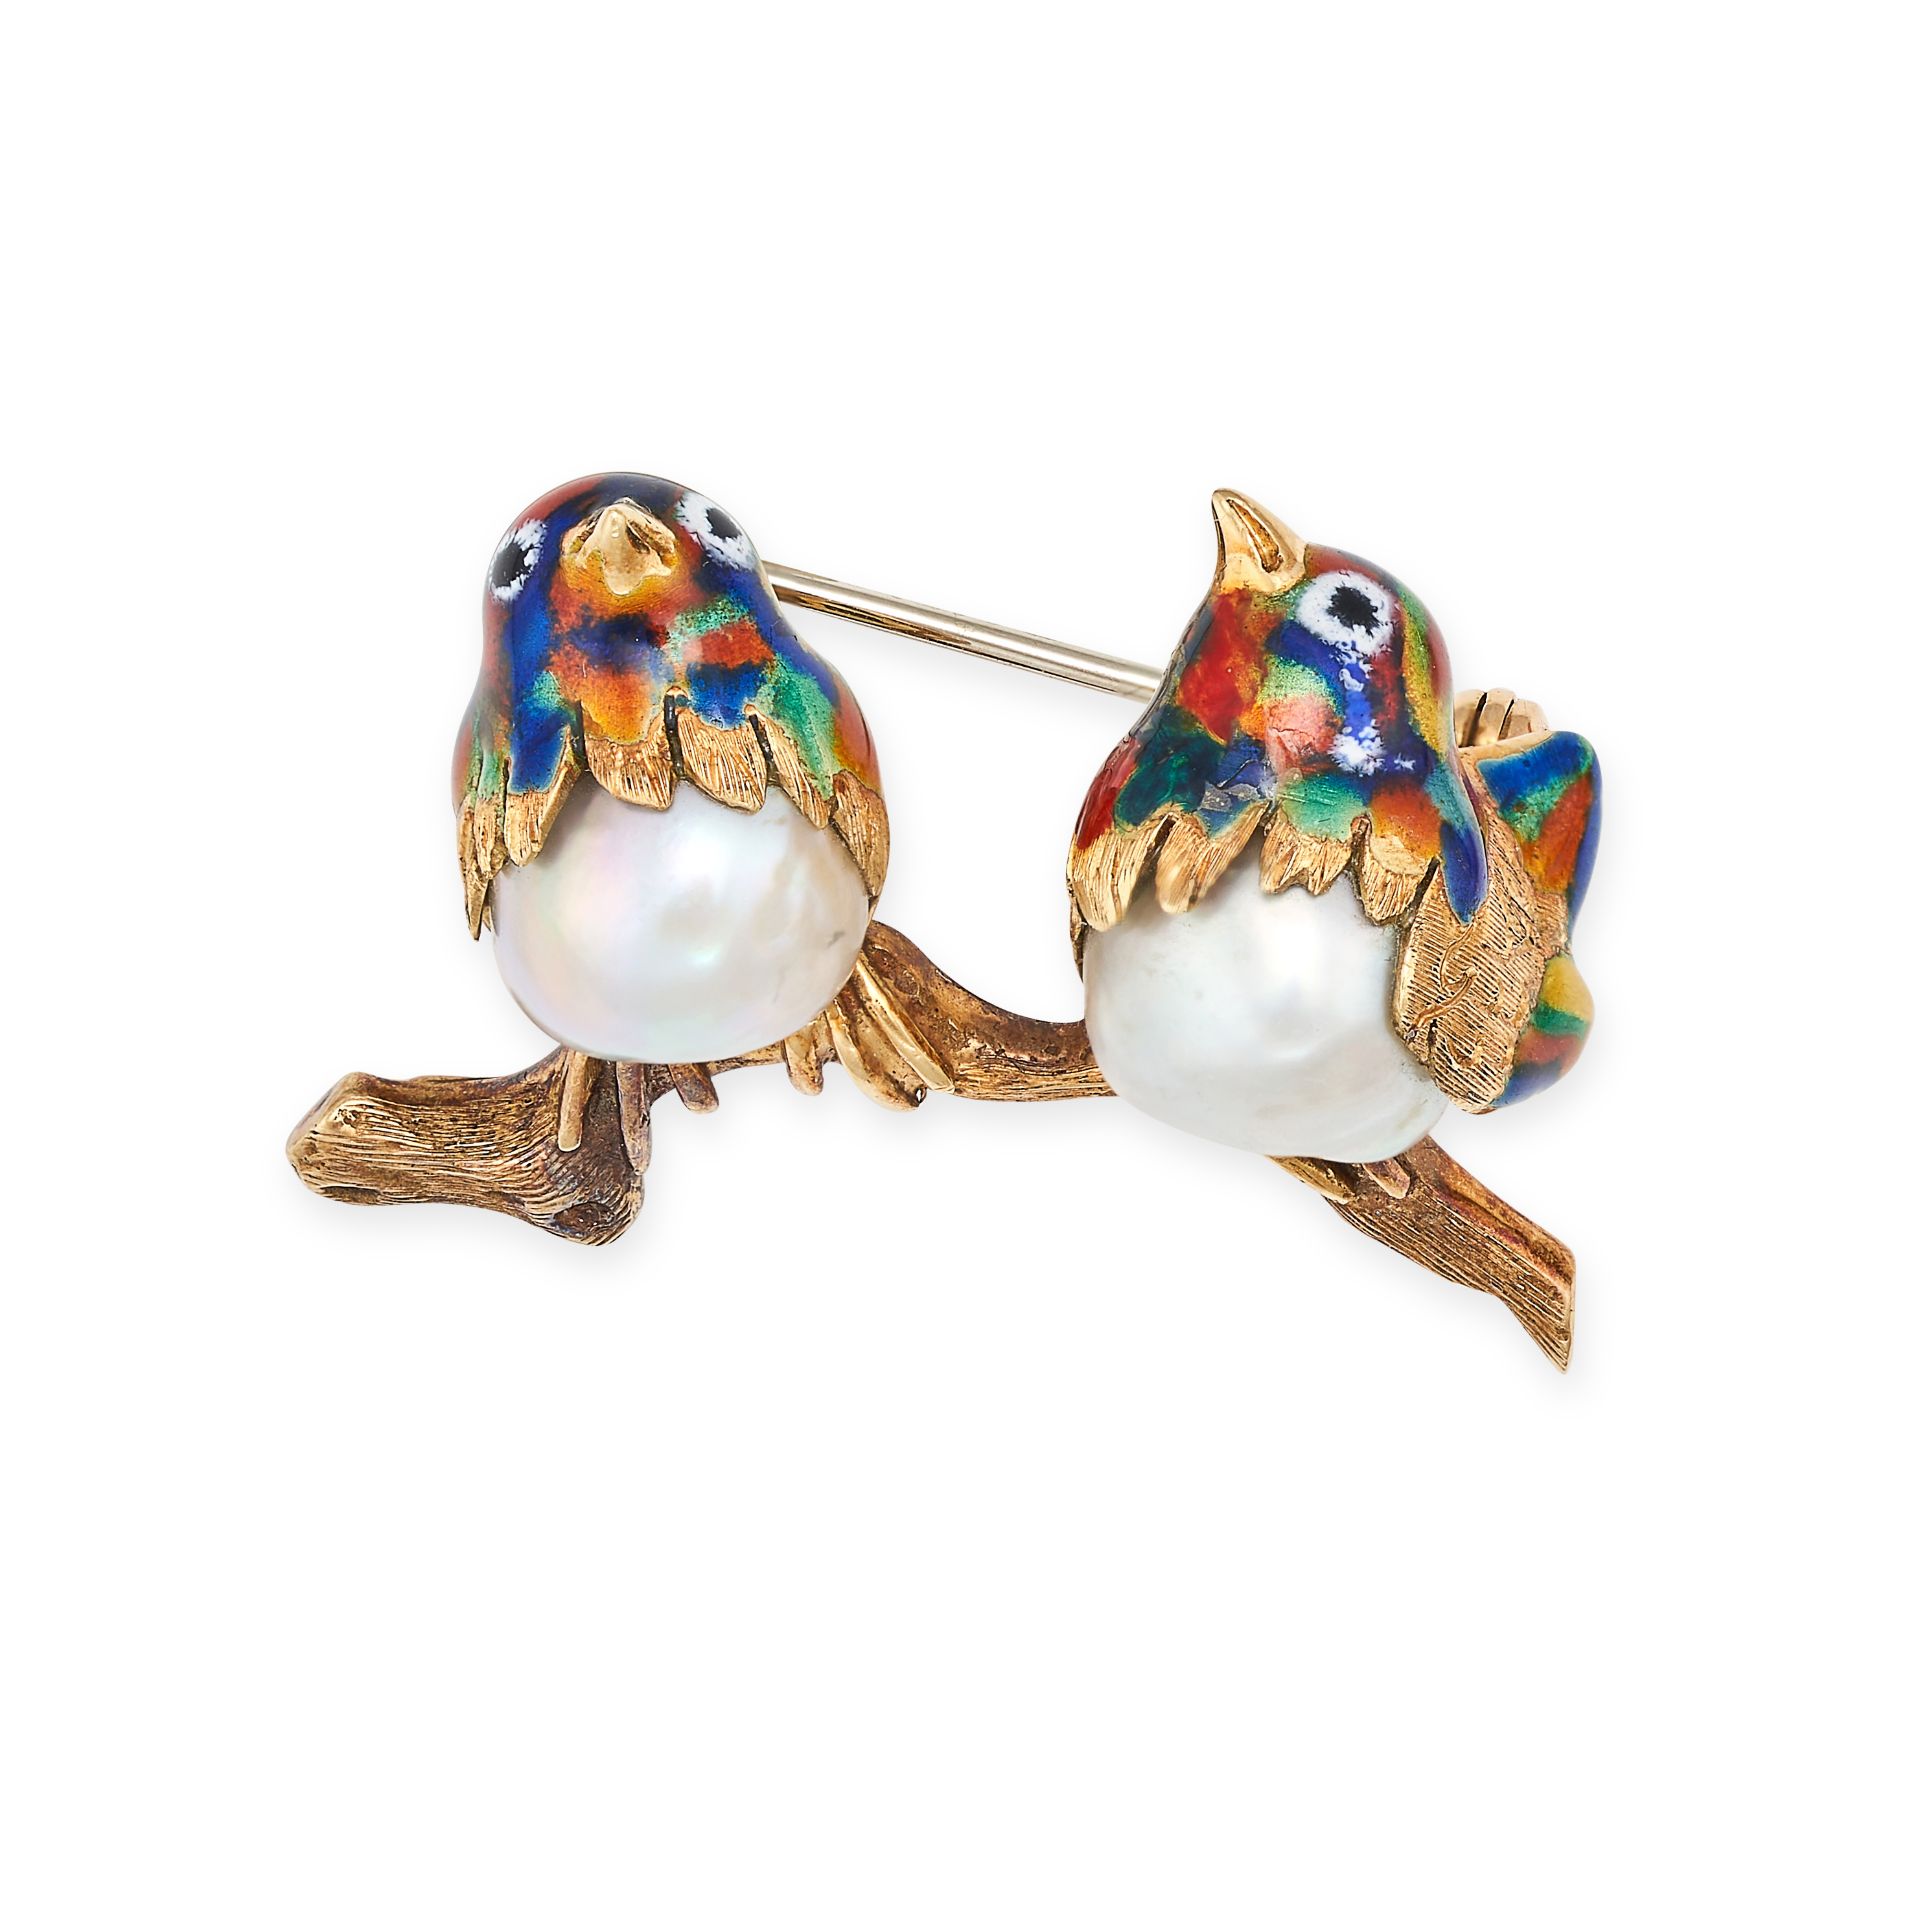 A VINTAGE ENAMEL AND PEARL BIRD BROOCH in 18ct yellow gold, designed as two birds perched on a br...